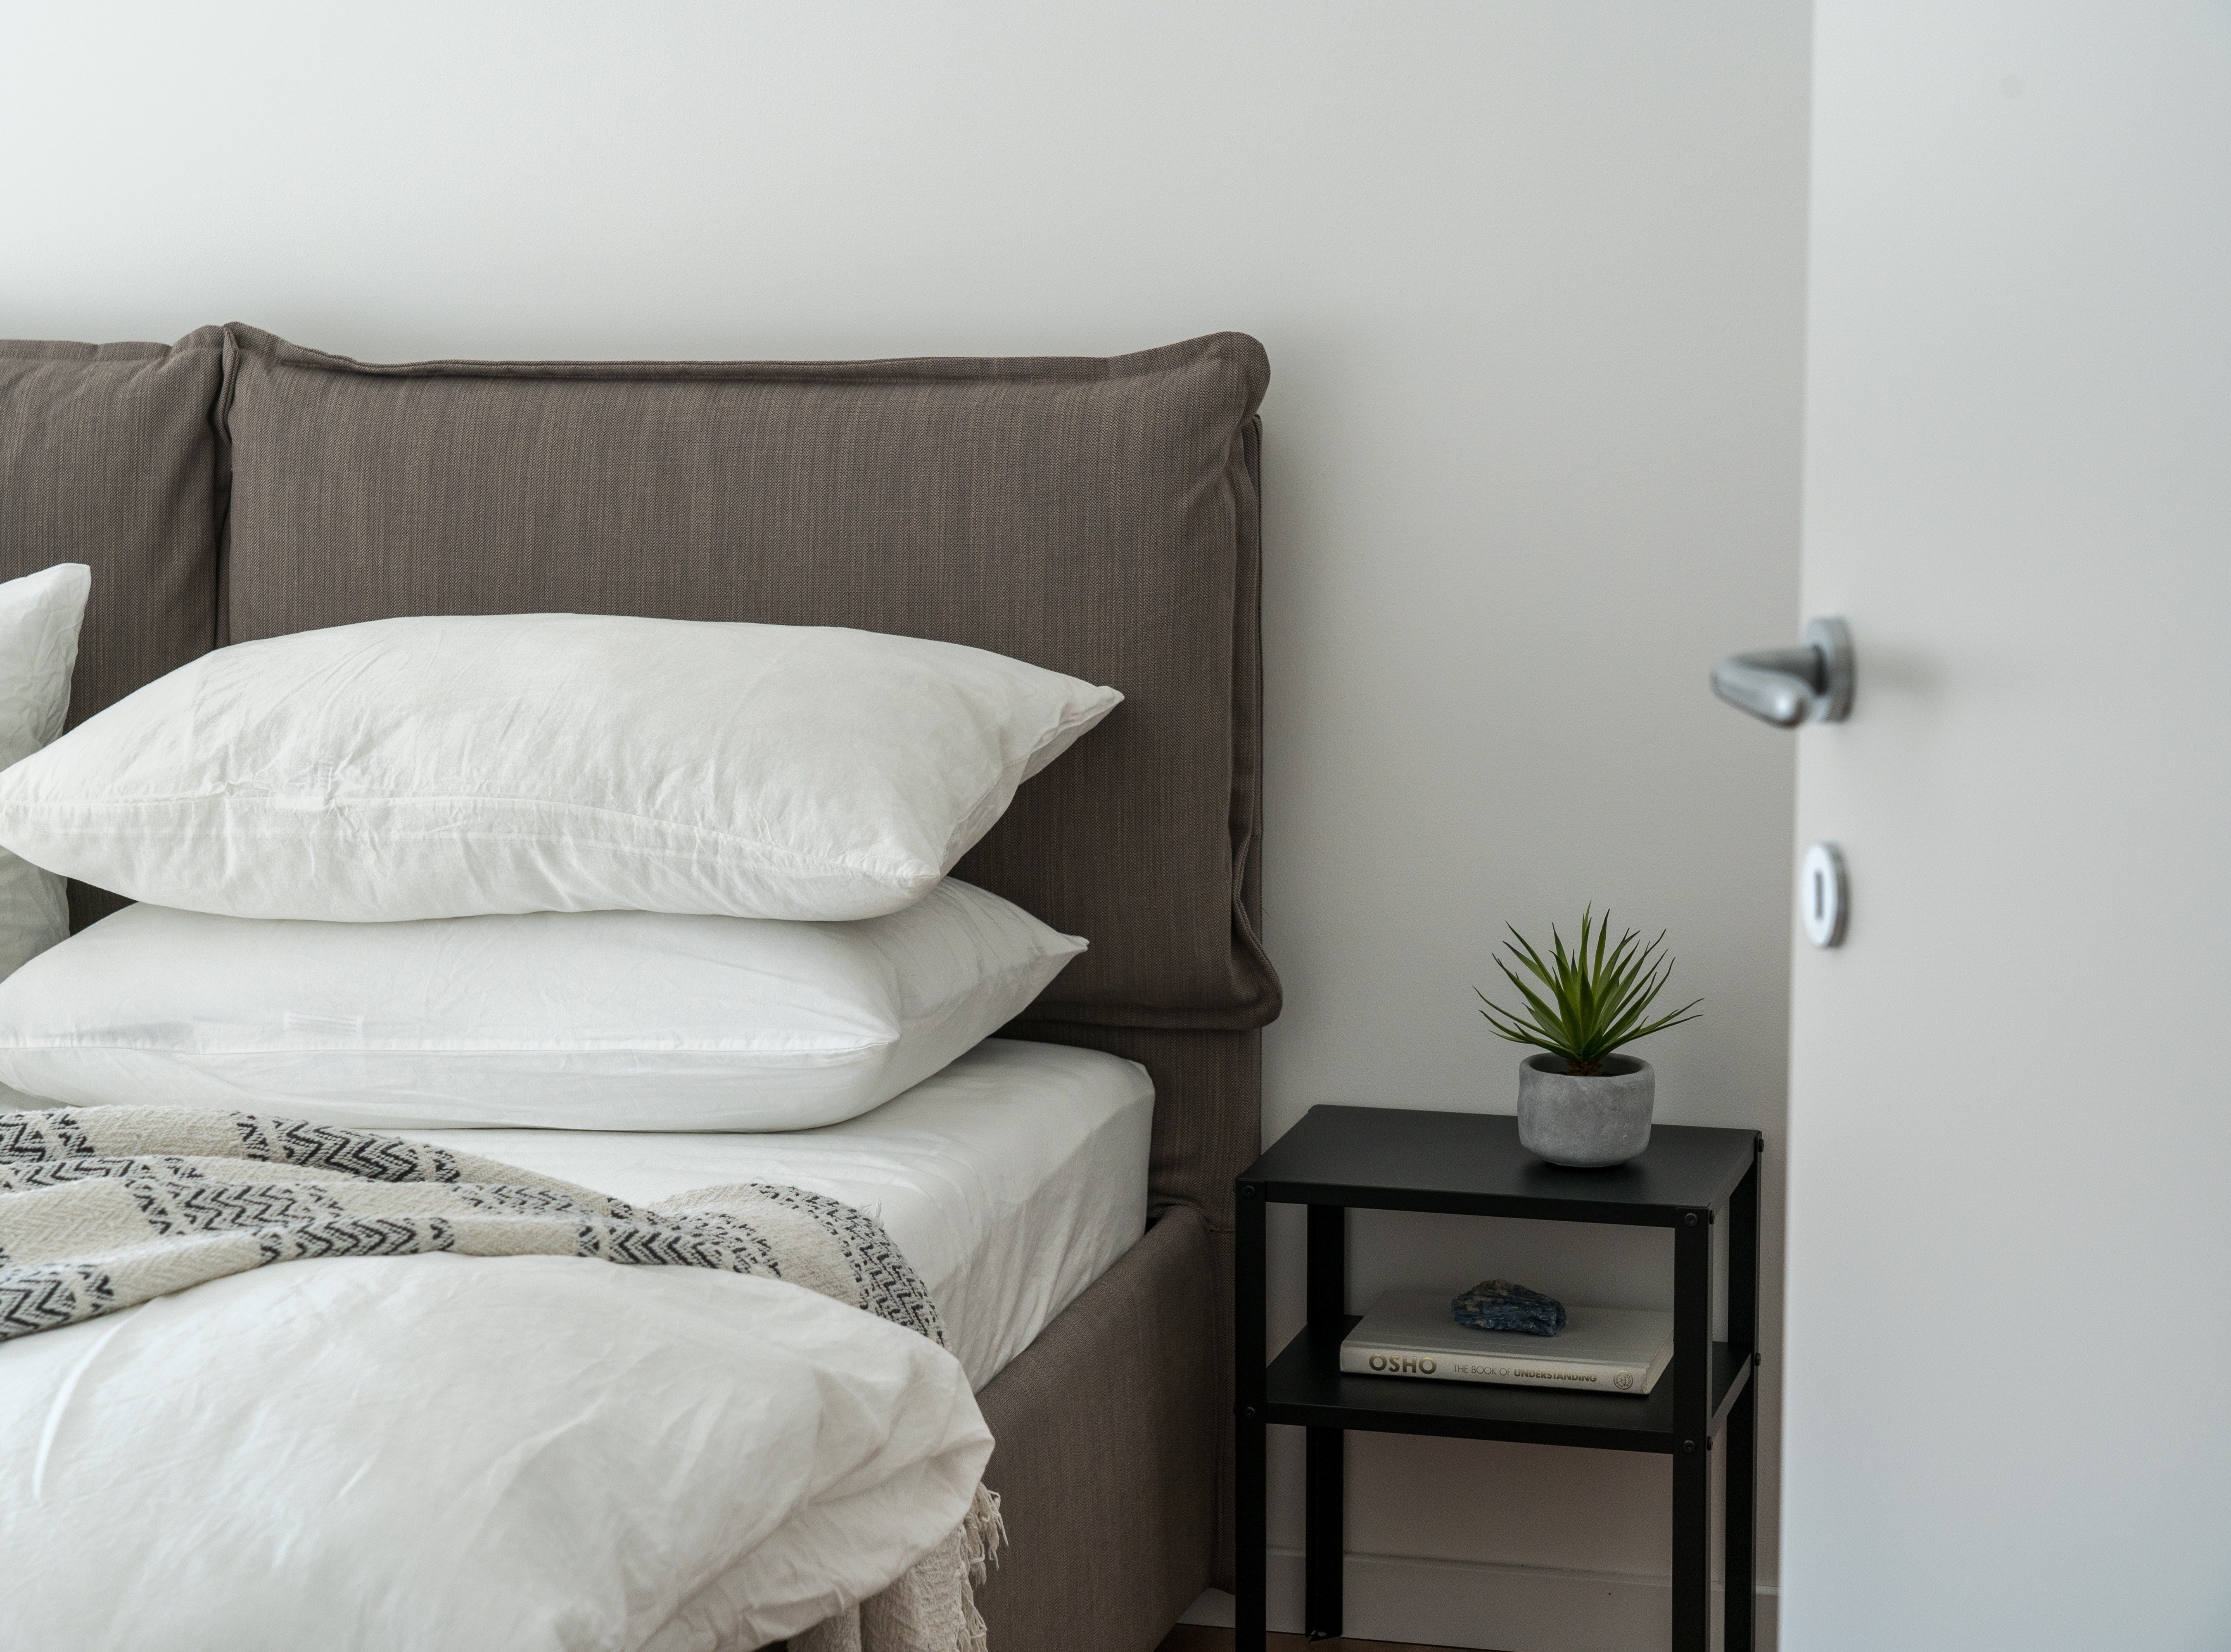 Jeannie prepared her guest bedroom for the woman to sleep in that night. | Source: Pexels